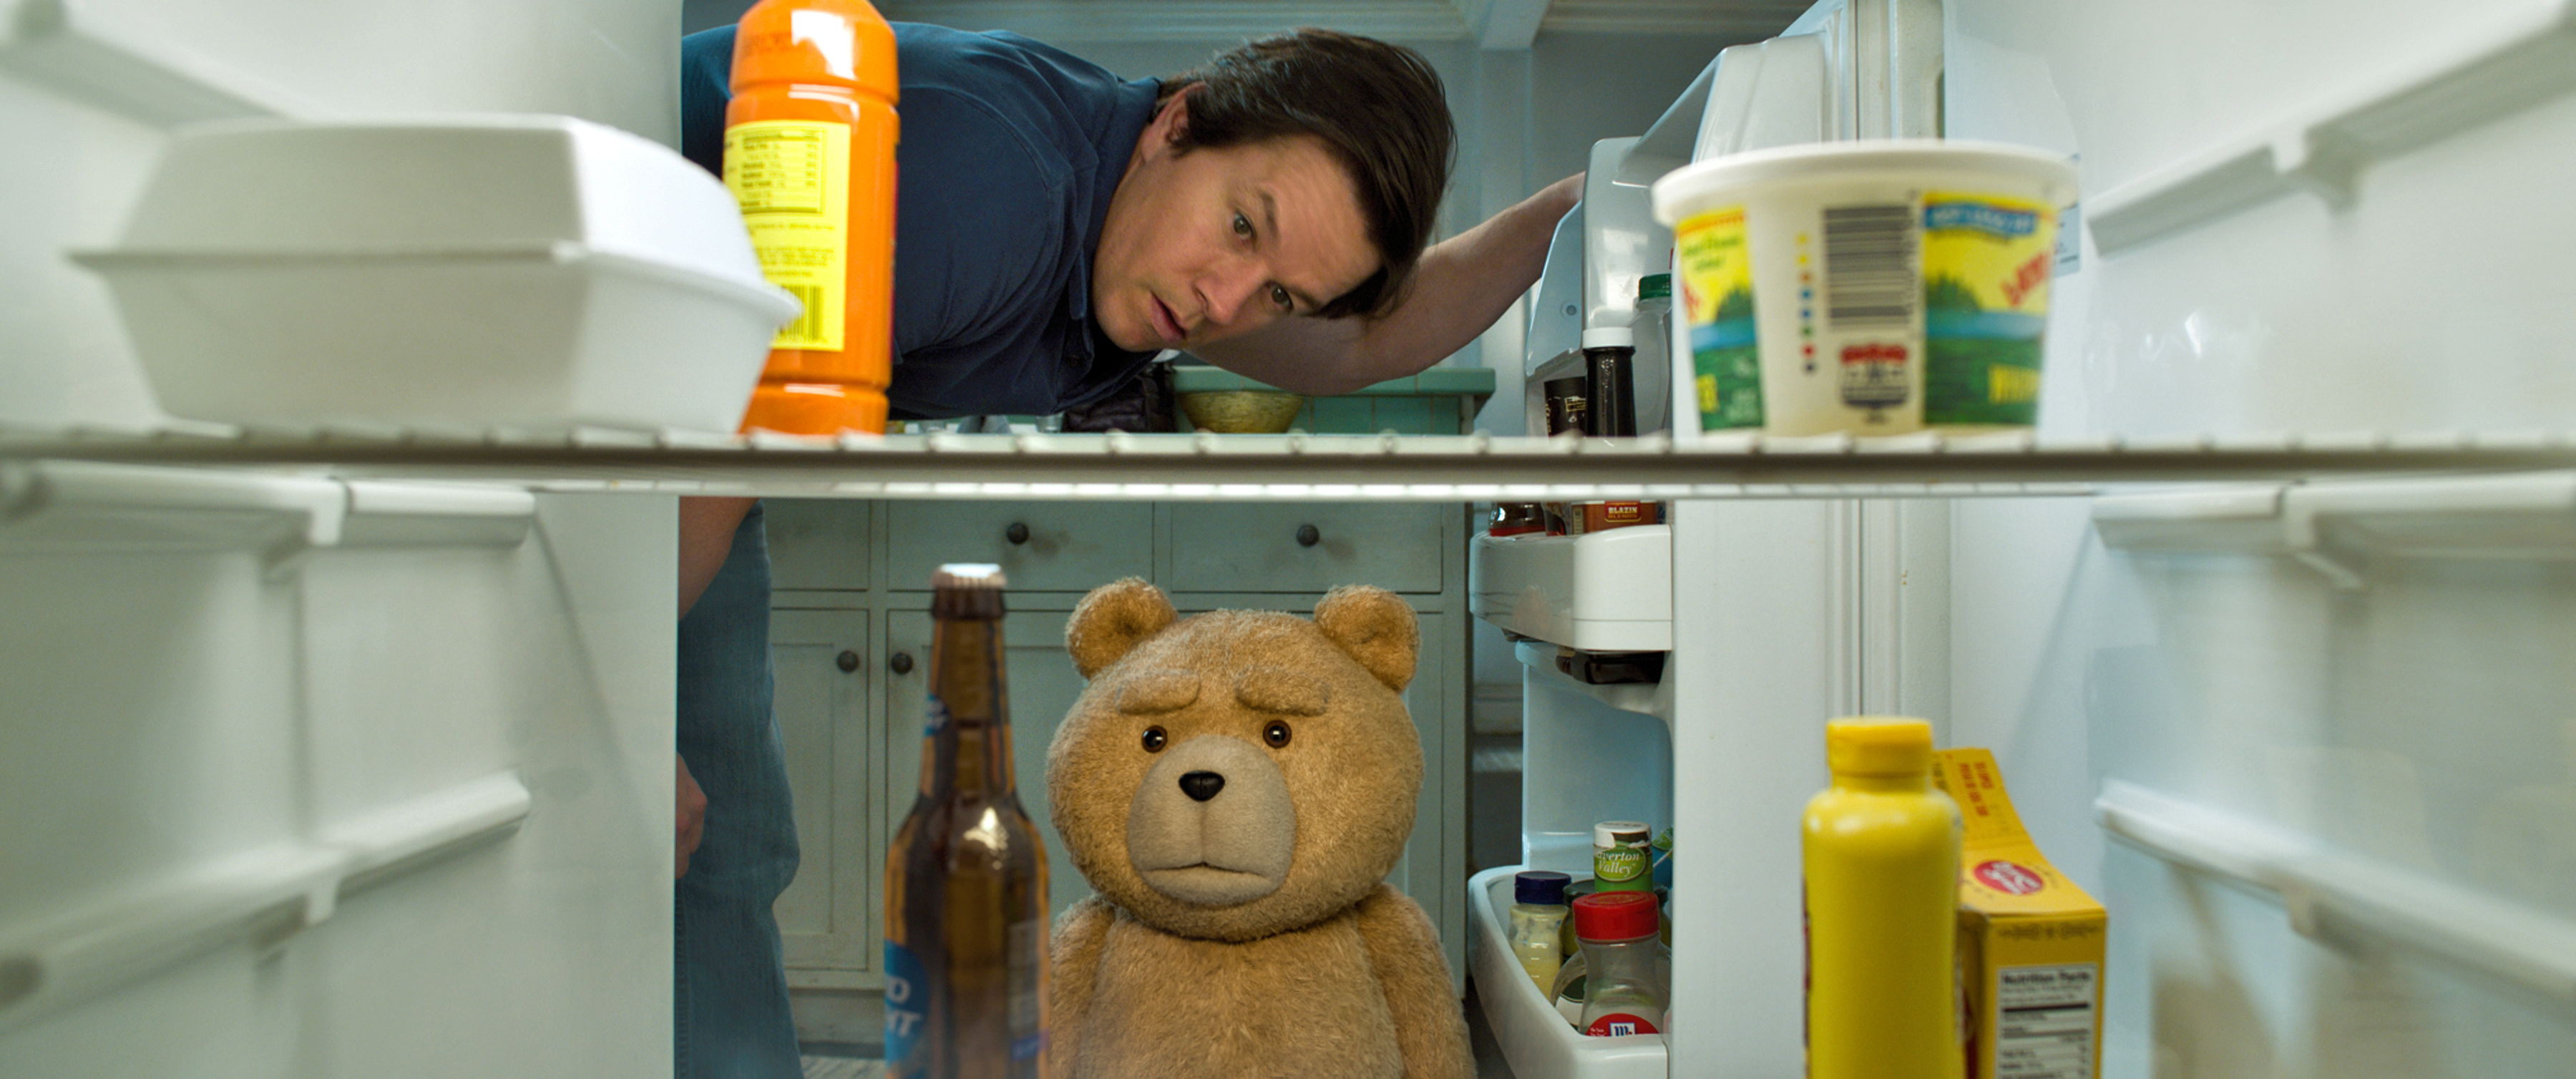 movie, ted 2, mark wahlberg, ted (movie character)